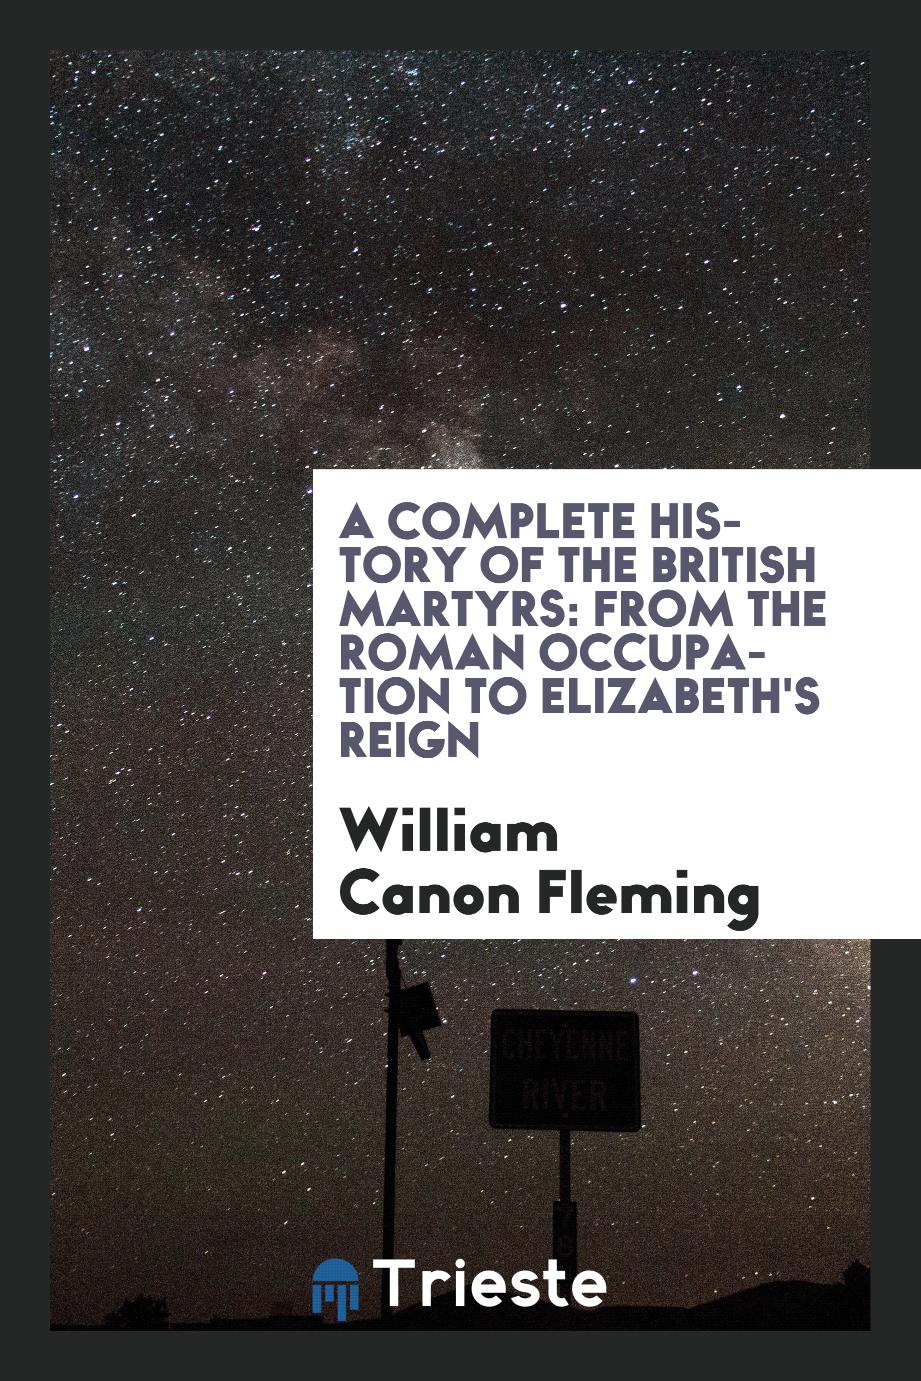 William Canon Fleming - A complete history of the British martyrs: from the Roman occupation to Elizabeth's reign